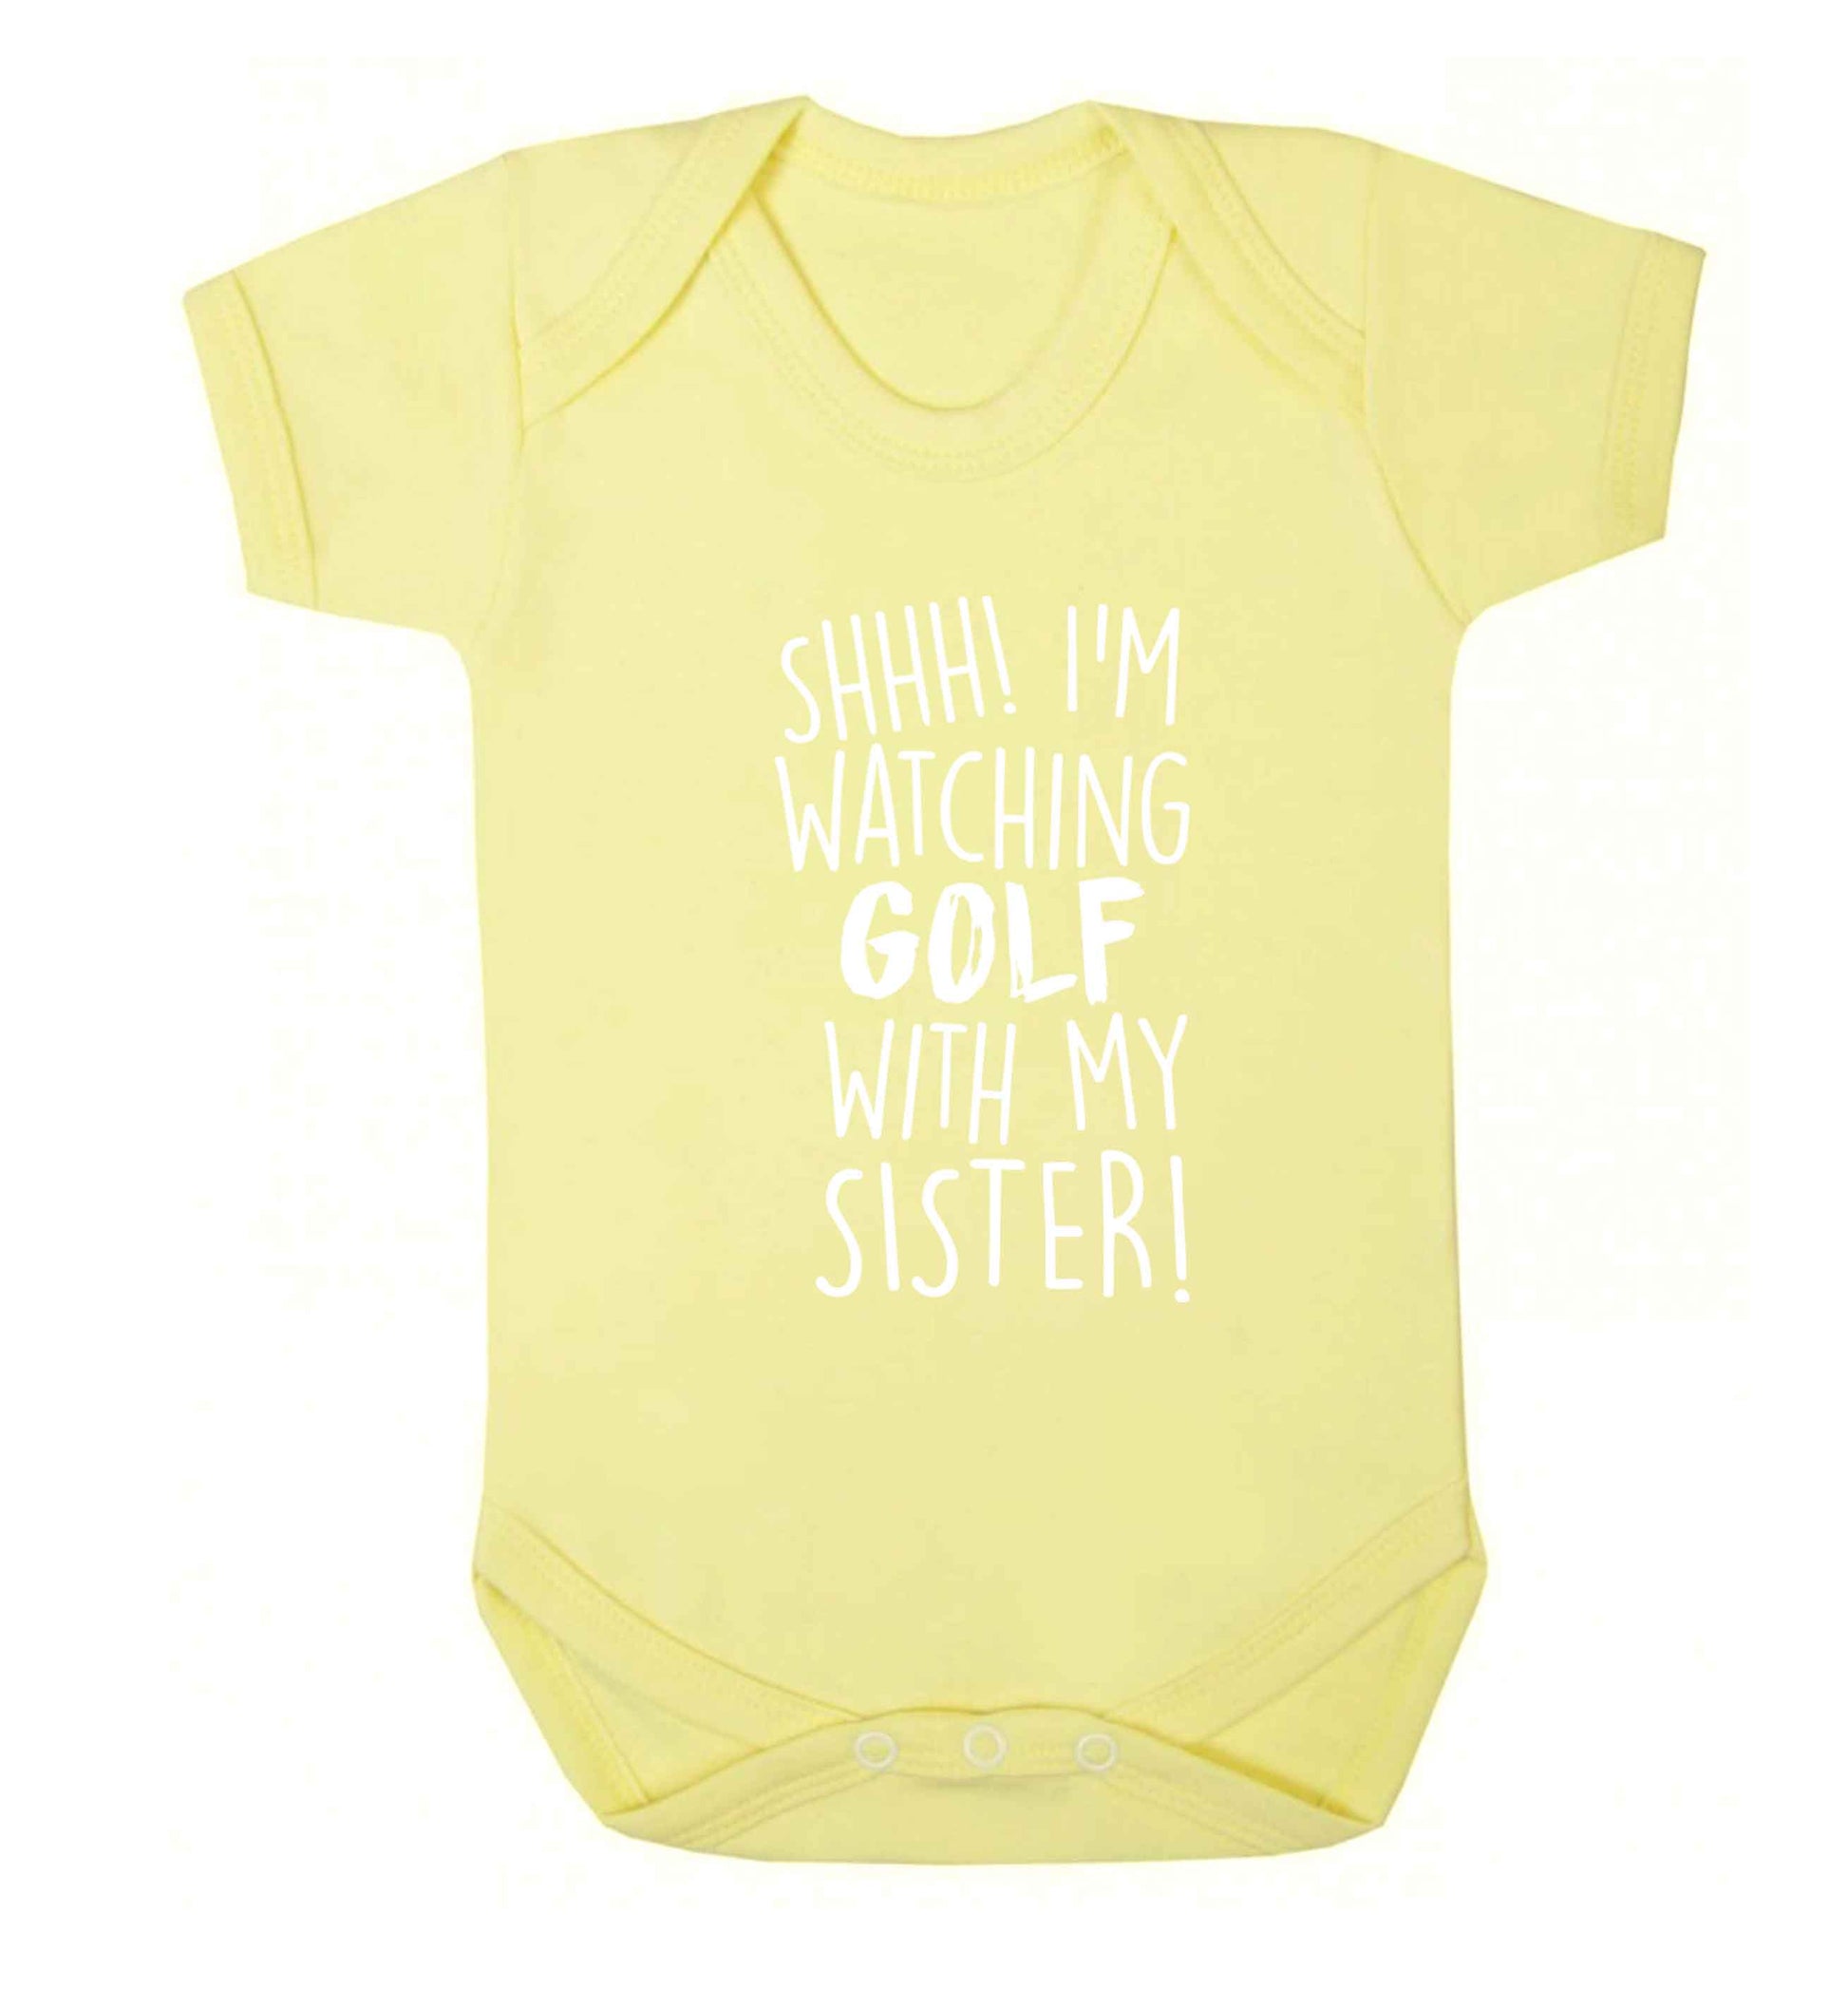 Shh I'm watching golf with my sister Baby Vest pale yellow 18-24 months